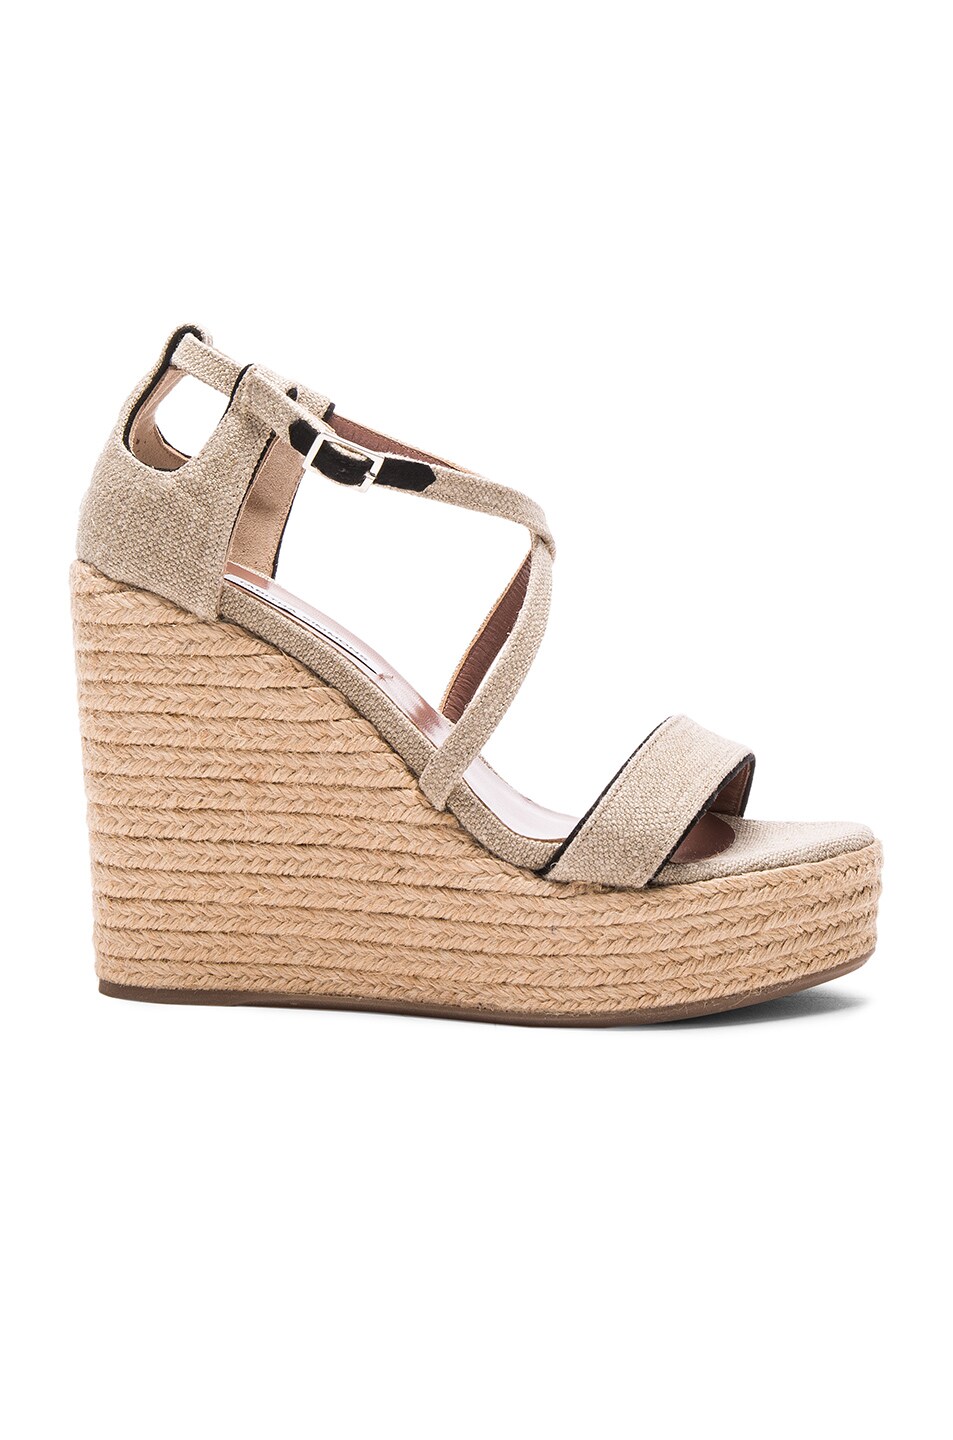 Image 1 of Tabitha Simmons Linen Jenny Wedges in Natural Linen